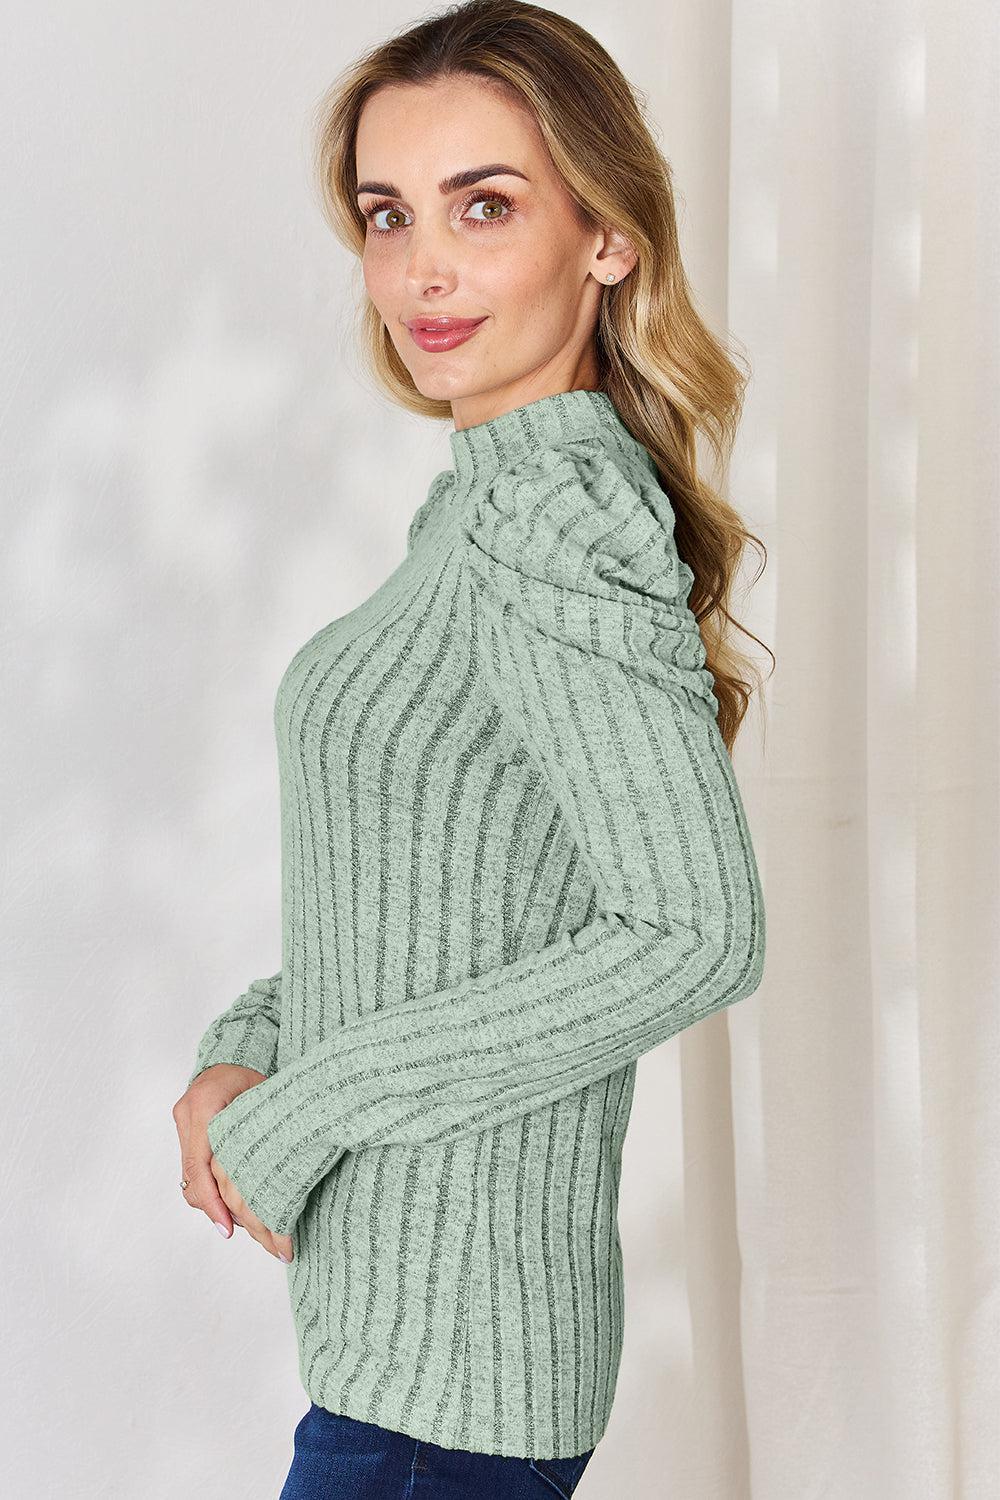 a woman wearing a green turtle neck sweater